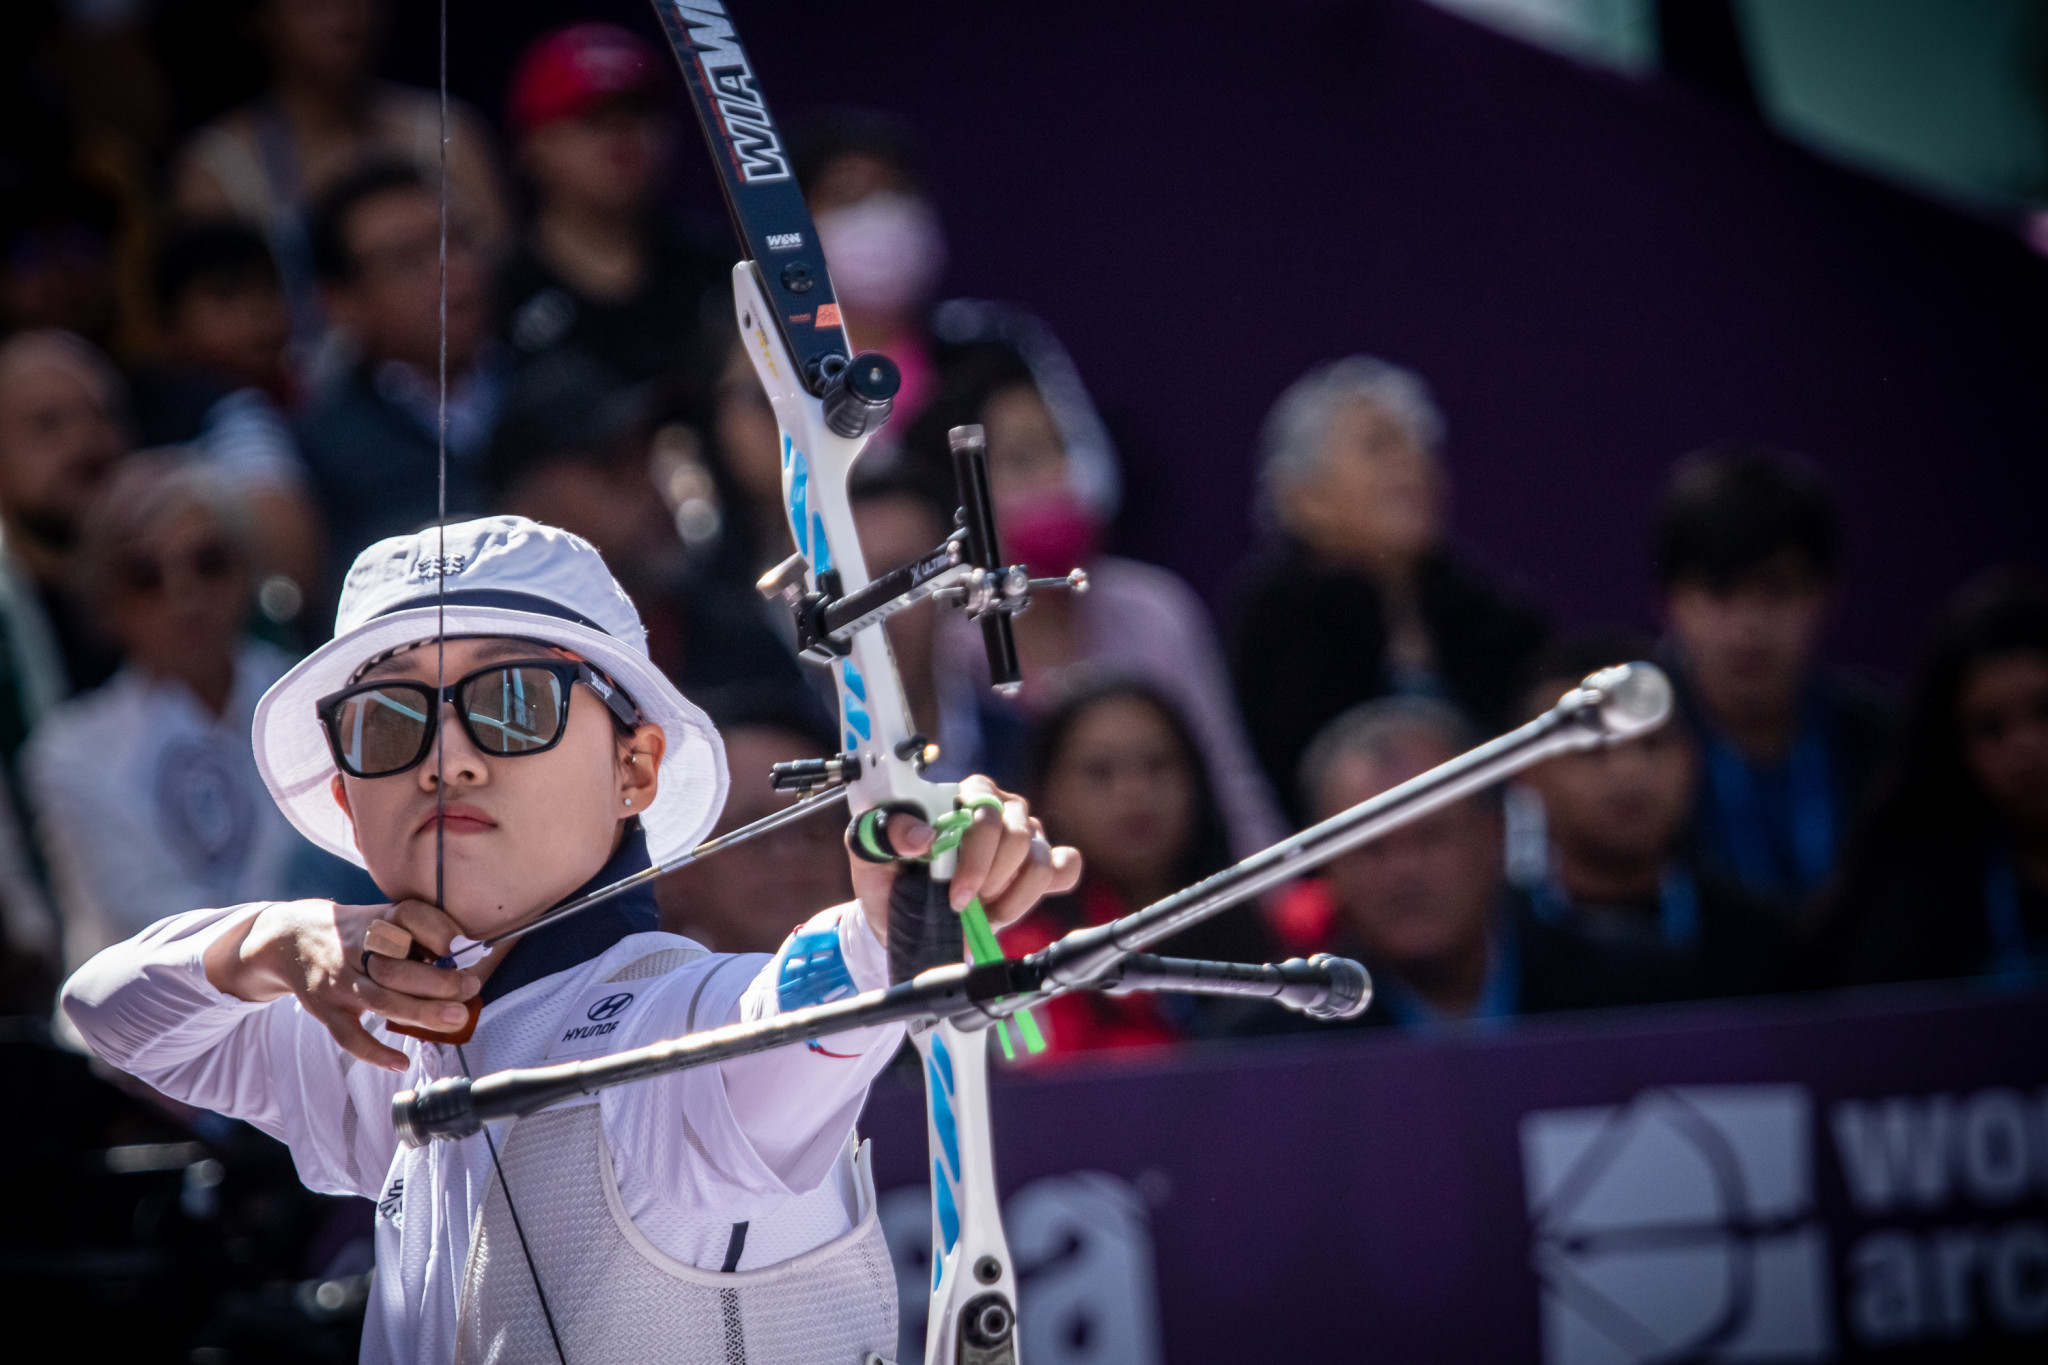 Archery has relaunched its women's award as a Gender Equity Award, open to both sexes ©Getty Images